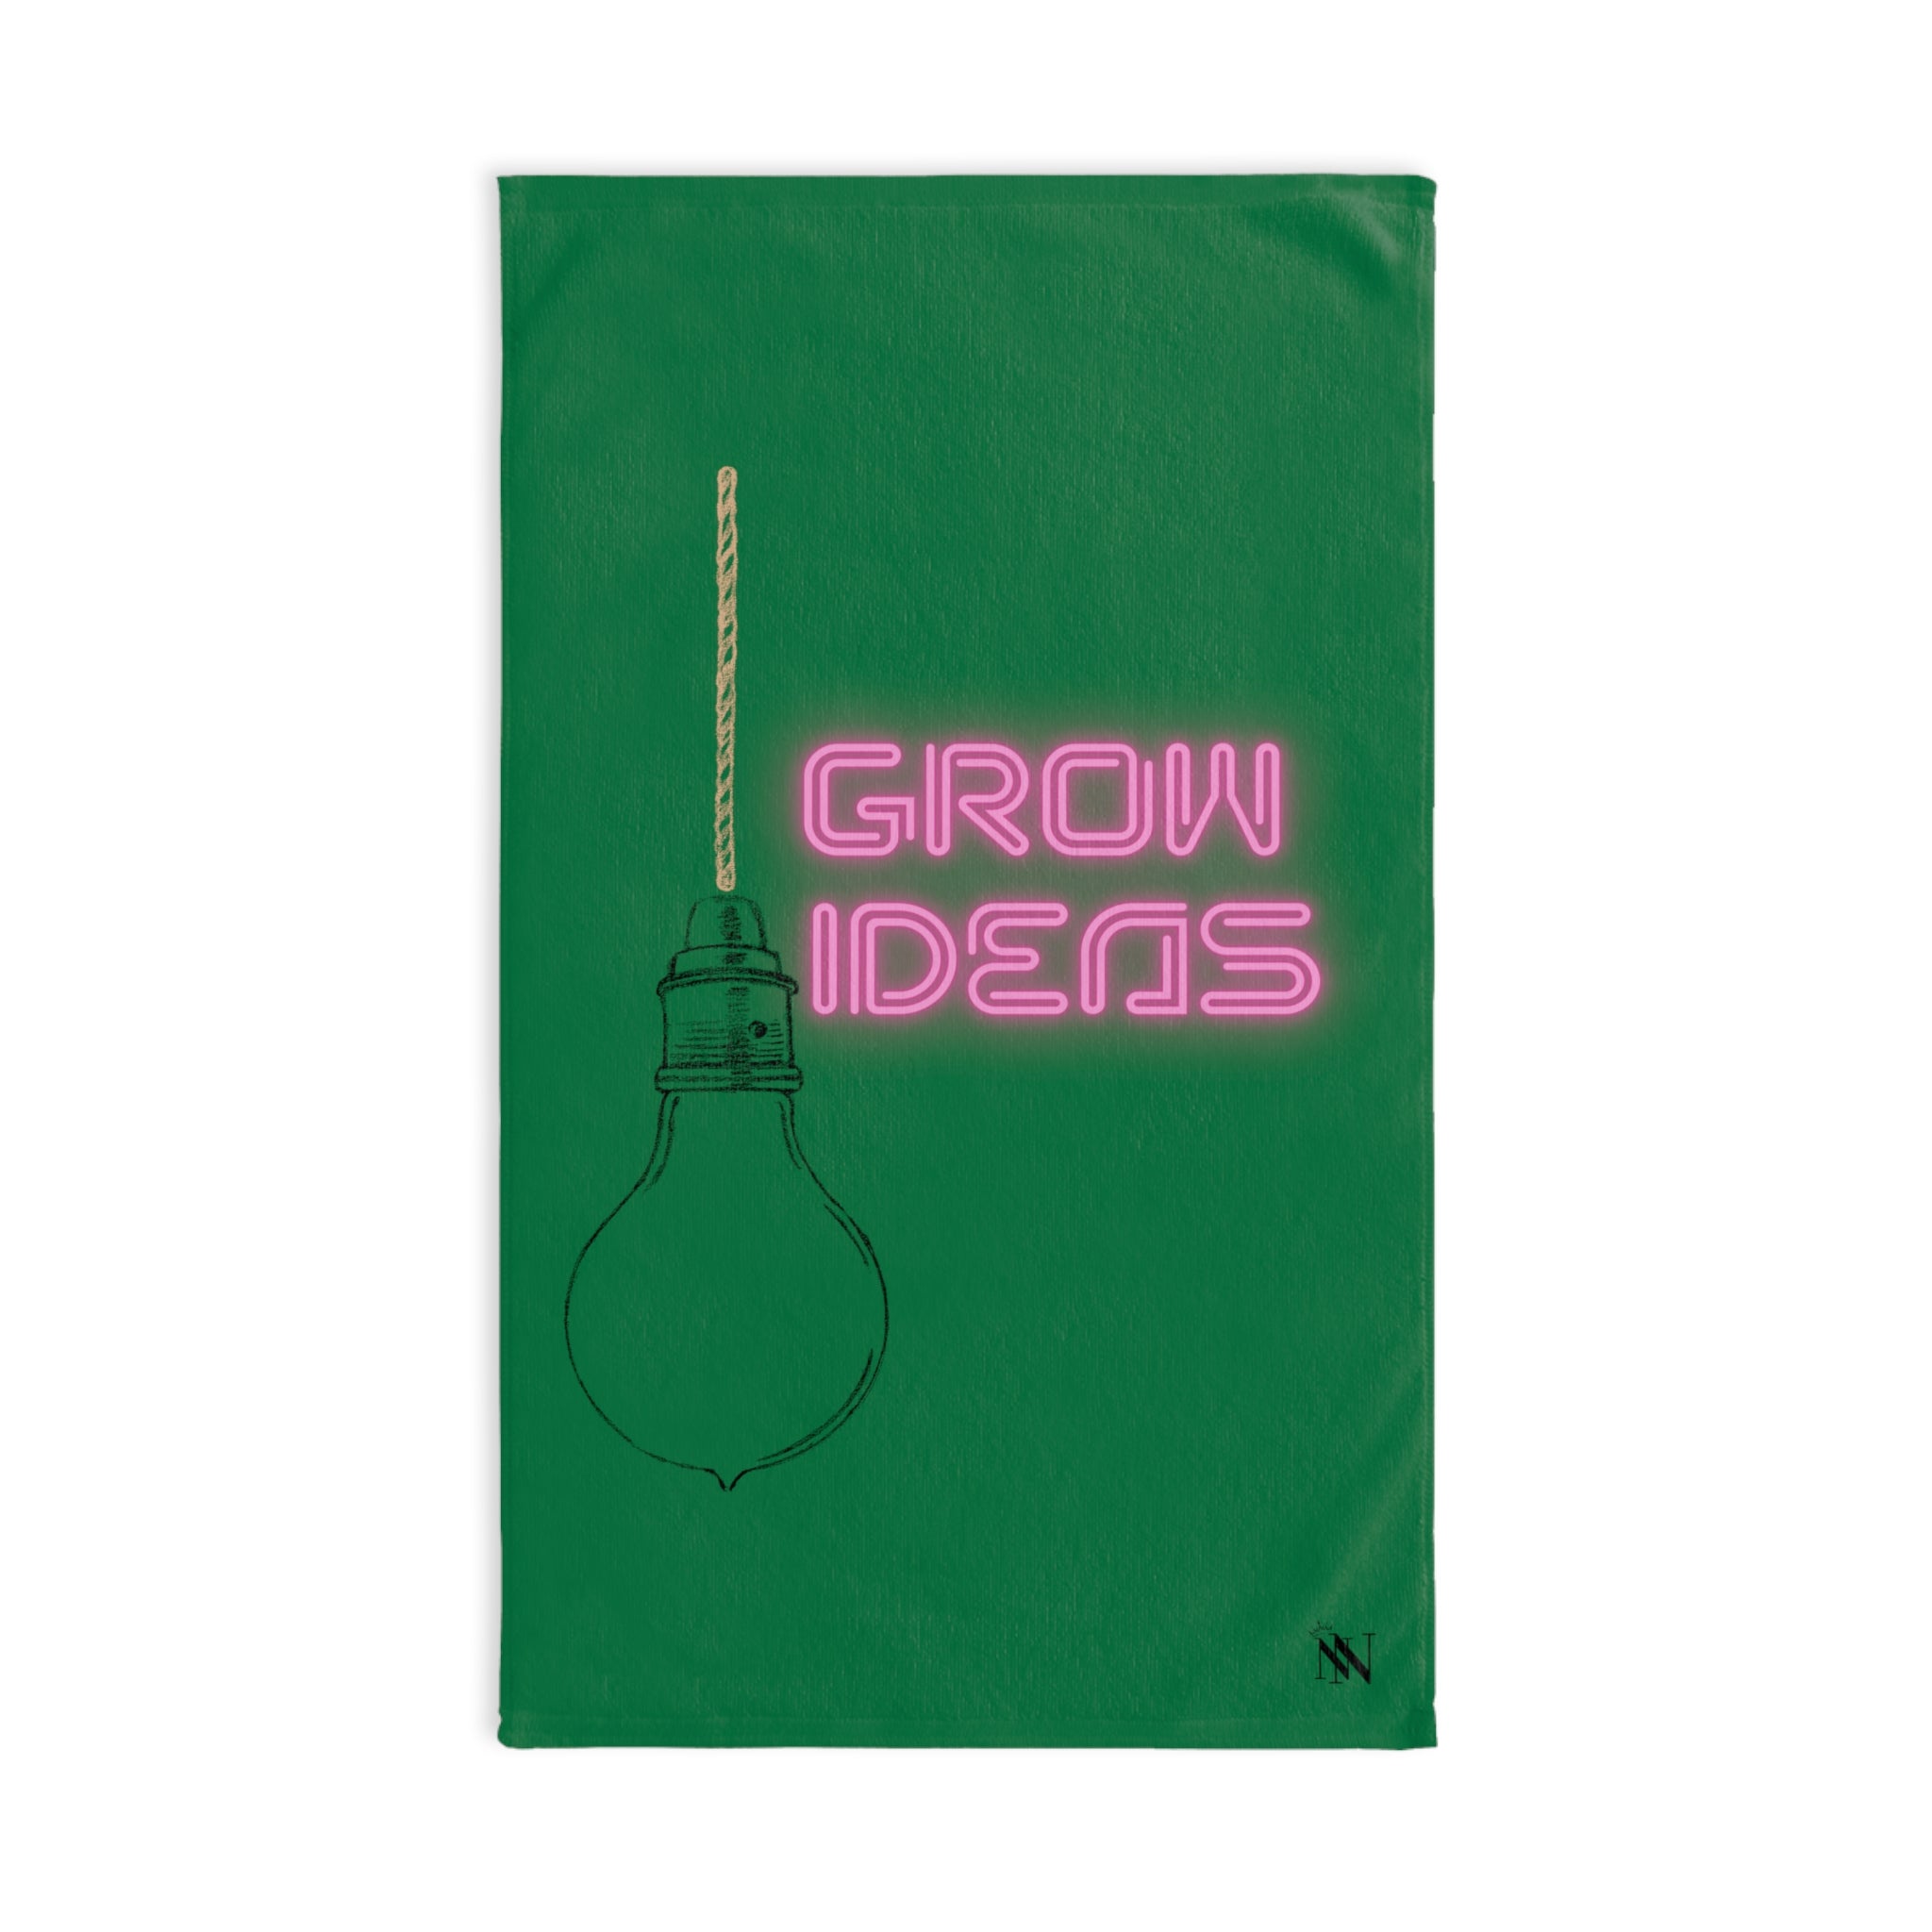 Grow Ideas Green | Anniversary Wedding, Christmas, Valentines Day, Birthday Gifts for Him, Her, Romantic Gifts for Wife, Girlfriend, Couples Gifts for Boyfriend, Husband NECTAR NAPKINS